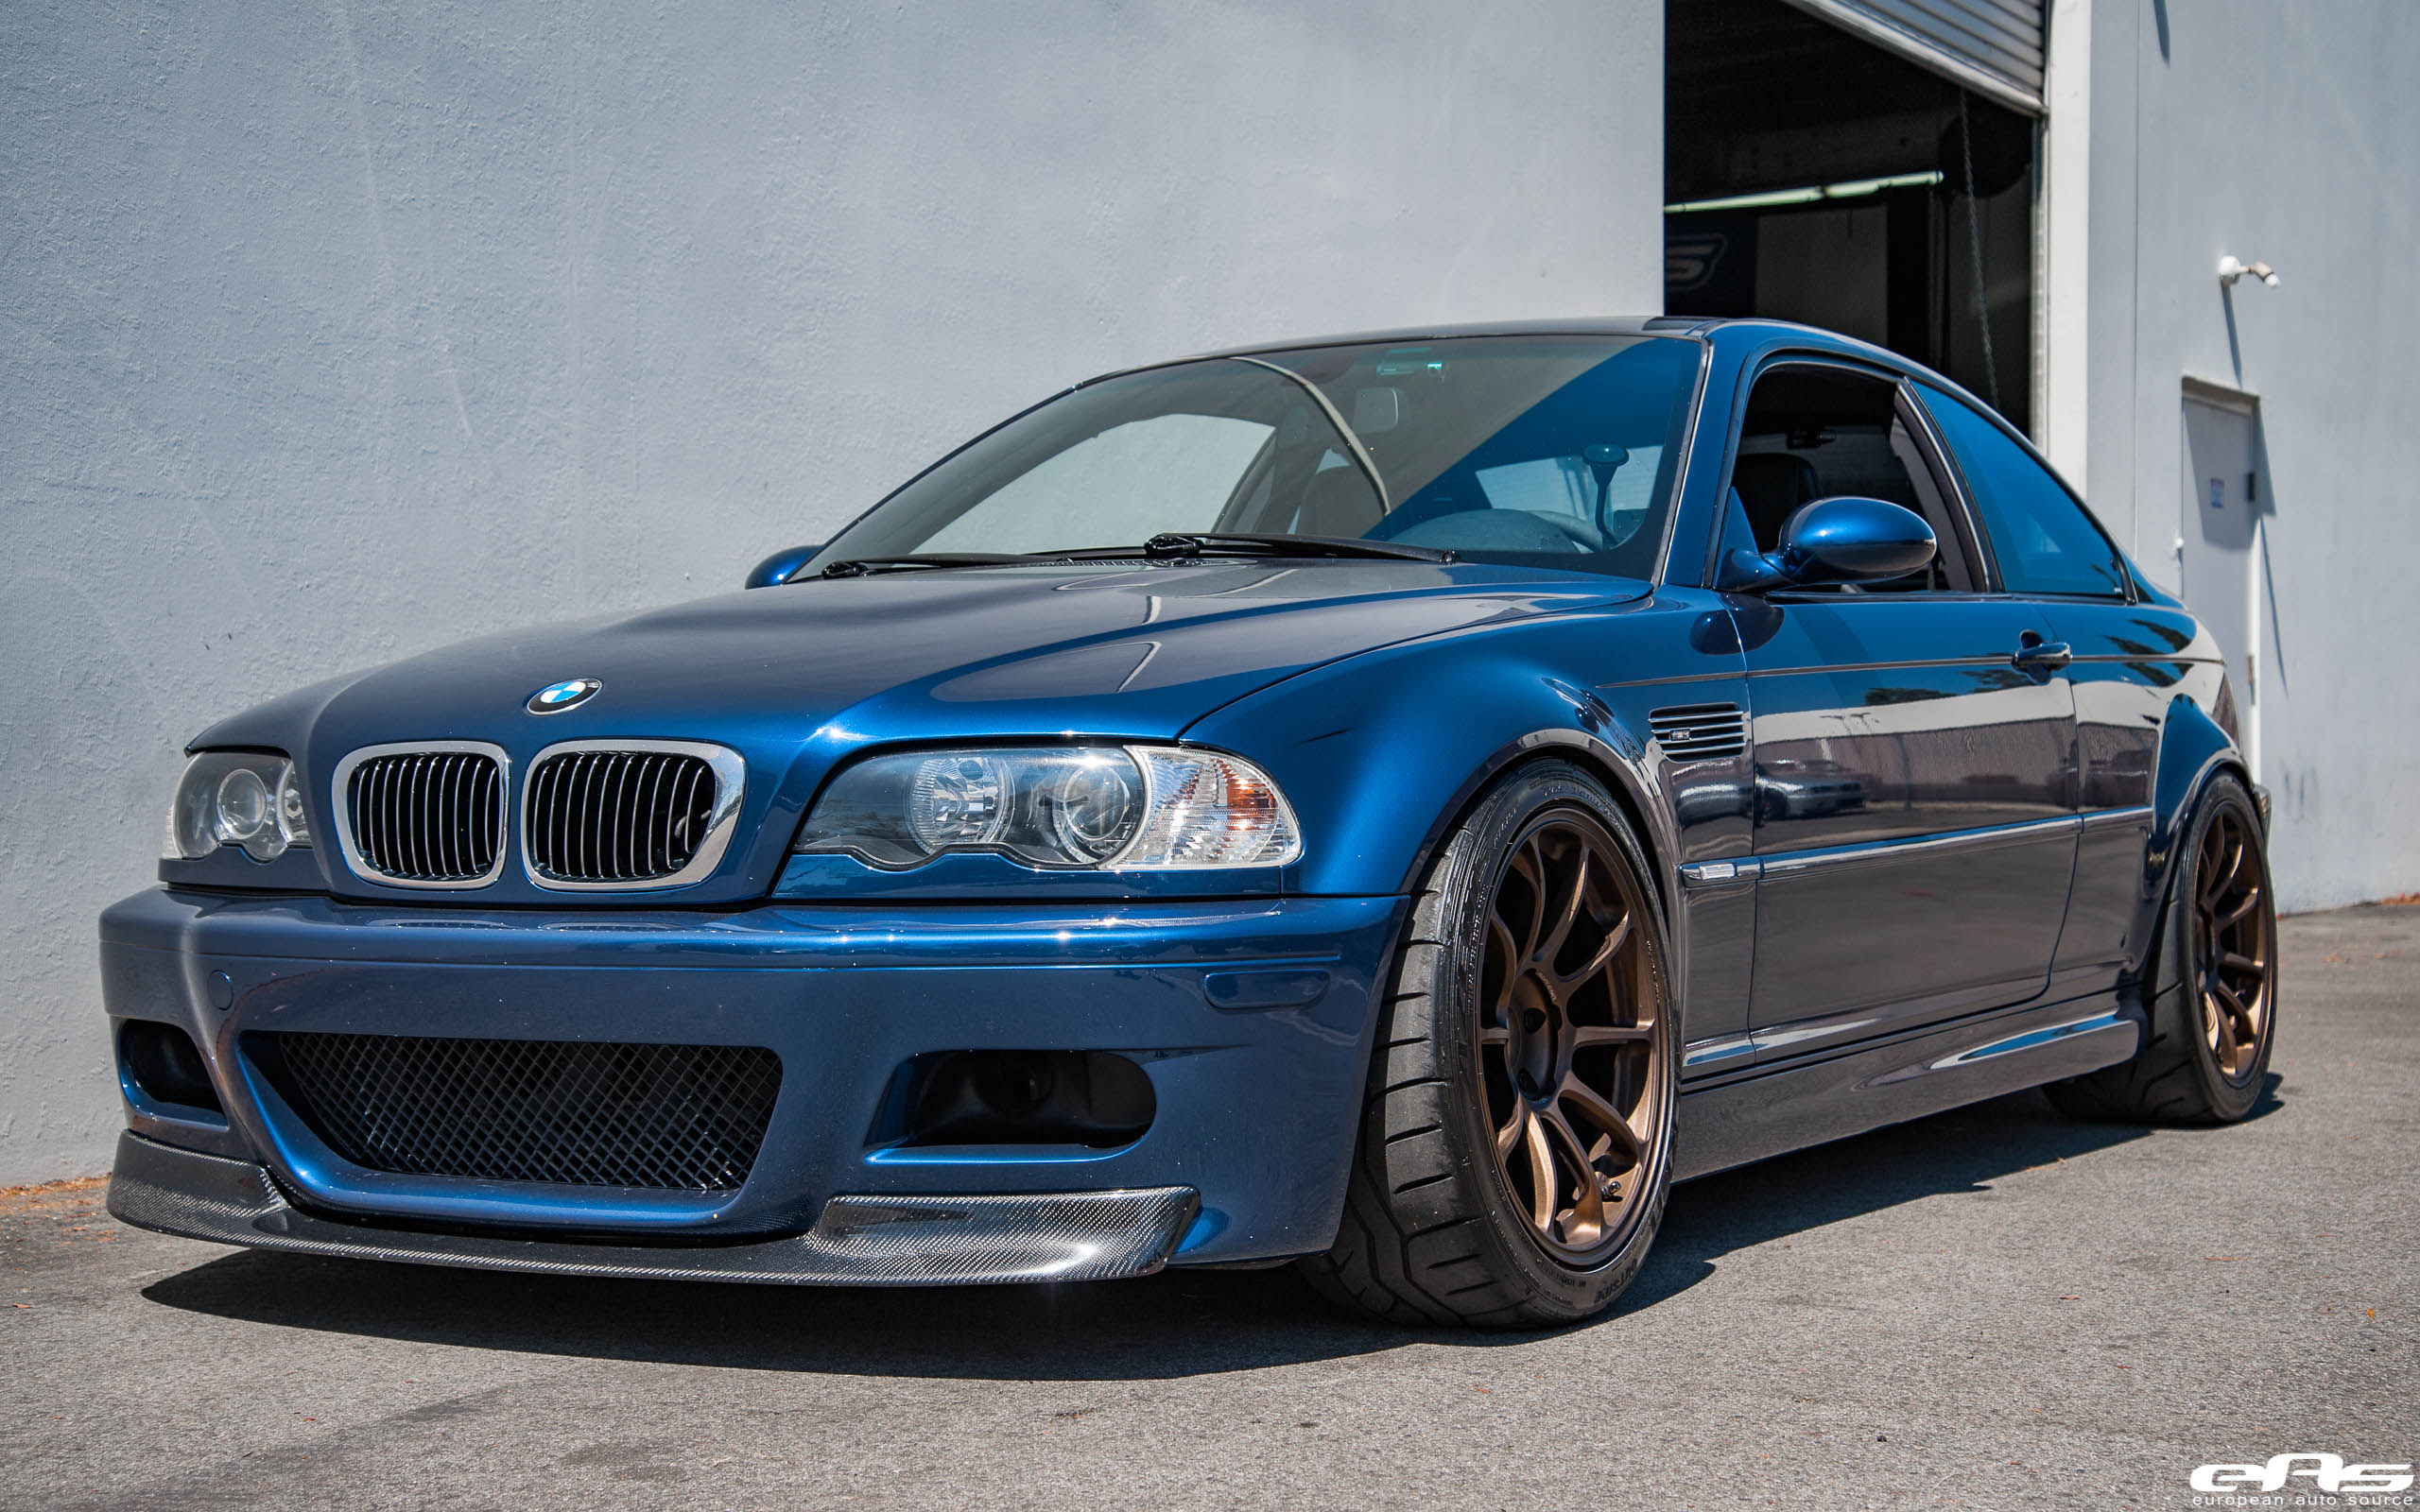 A Mystic Blue BMW E46 M3 Gets Aftermarket Goodies At